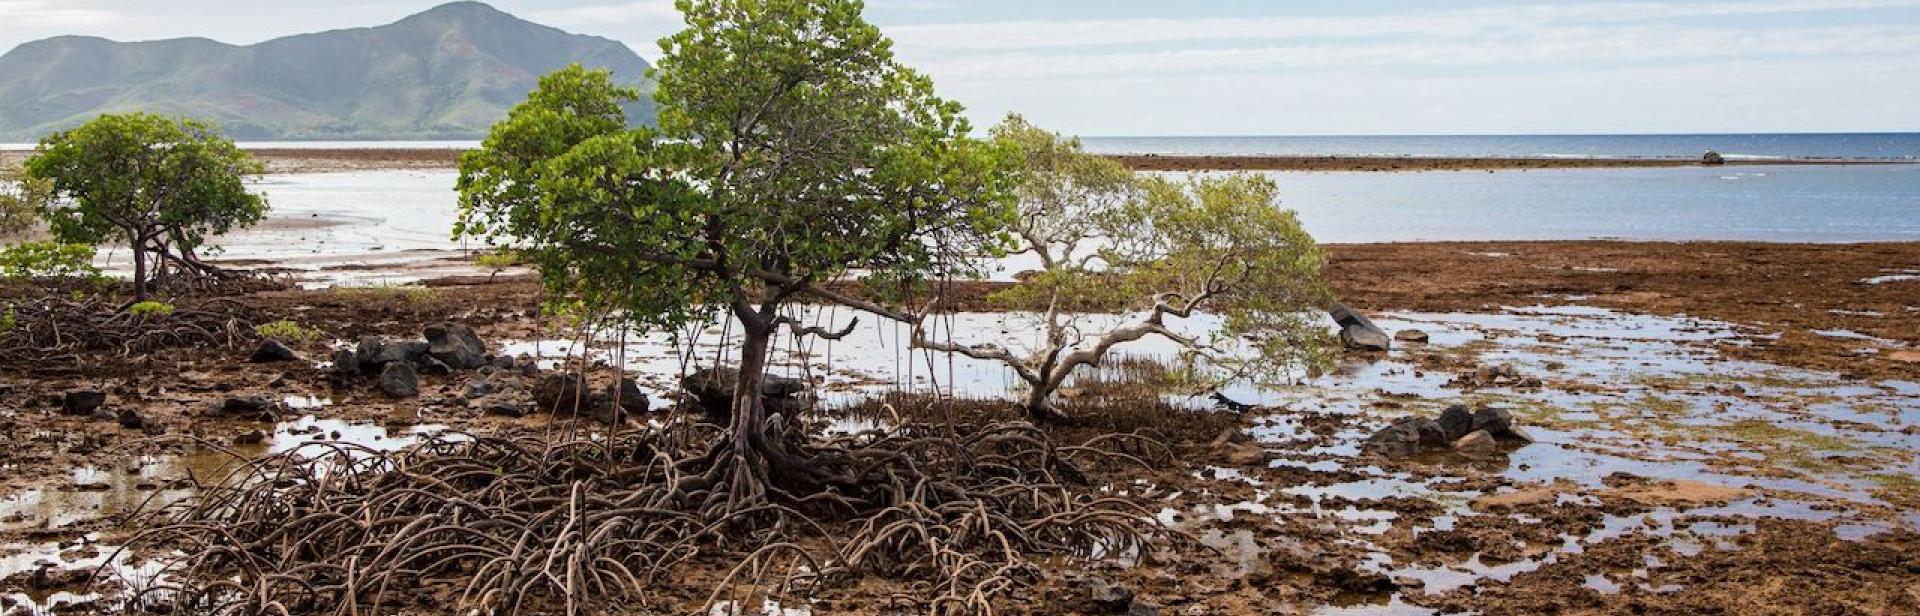 Trees in a mangrove area